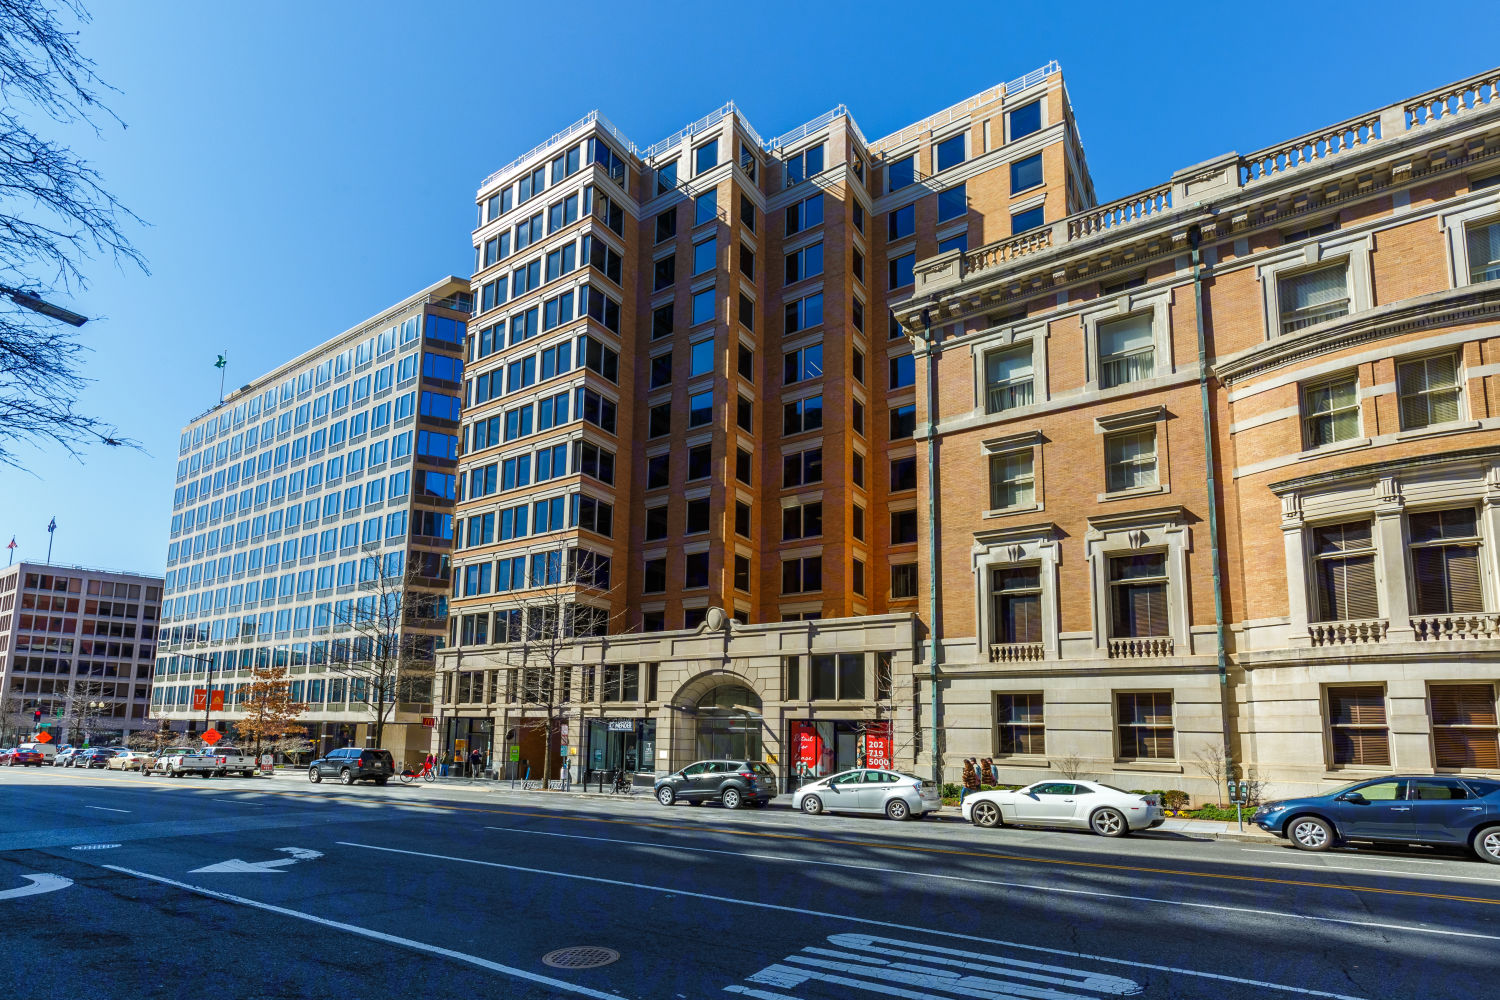 750 17th Street Northwest, Washington, DC Office Space for Rent VTS